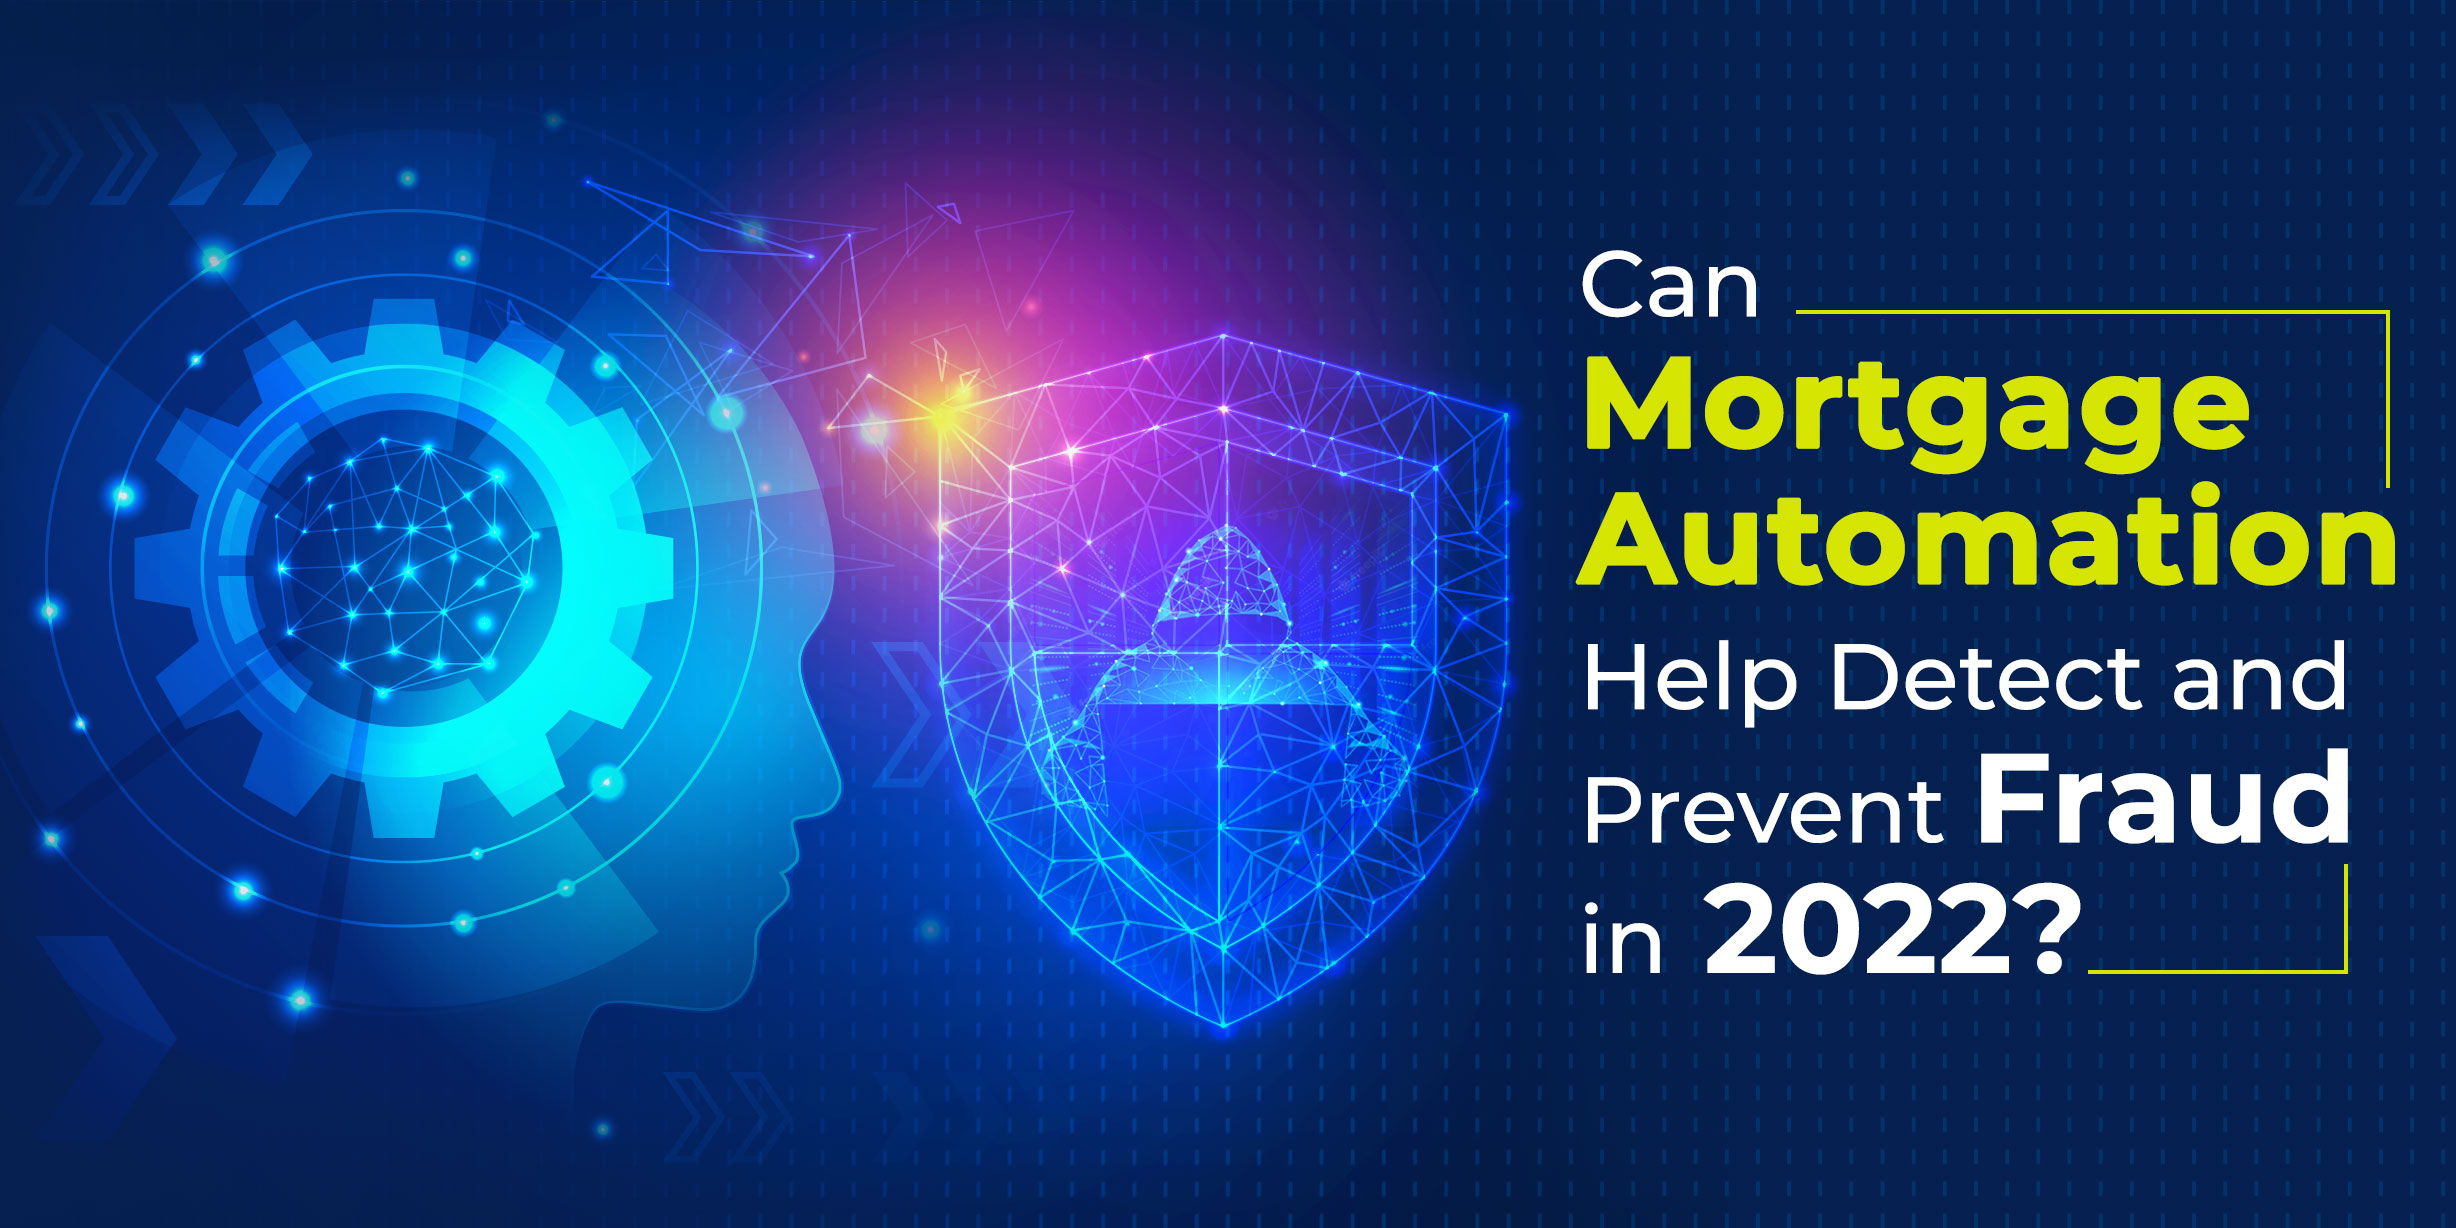 How Can Mortgage Automation Help Detect and Prevent Fraud